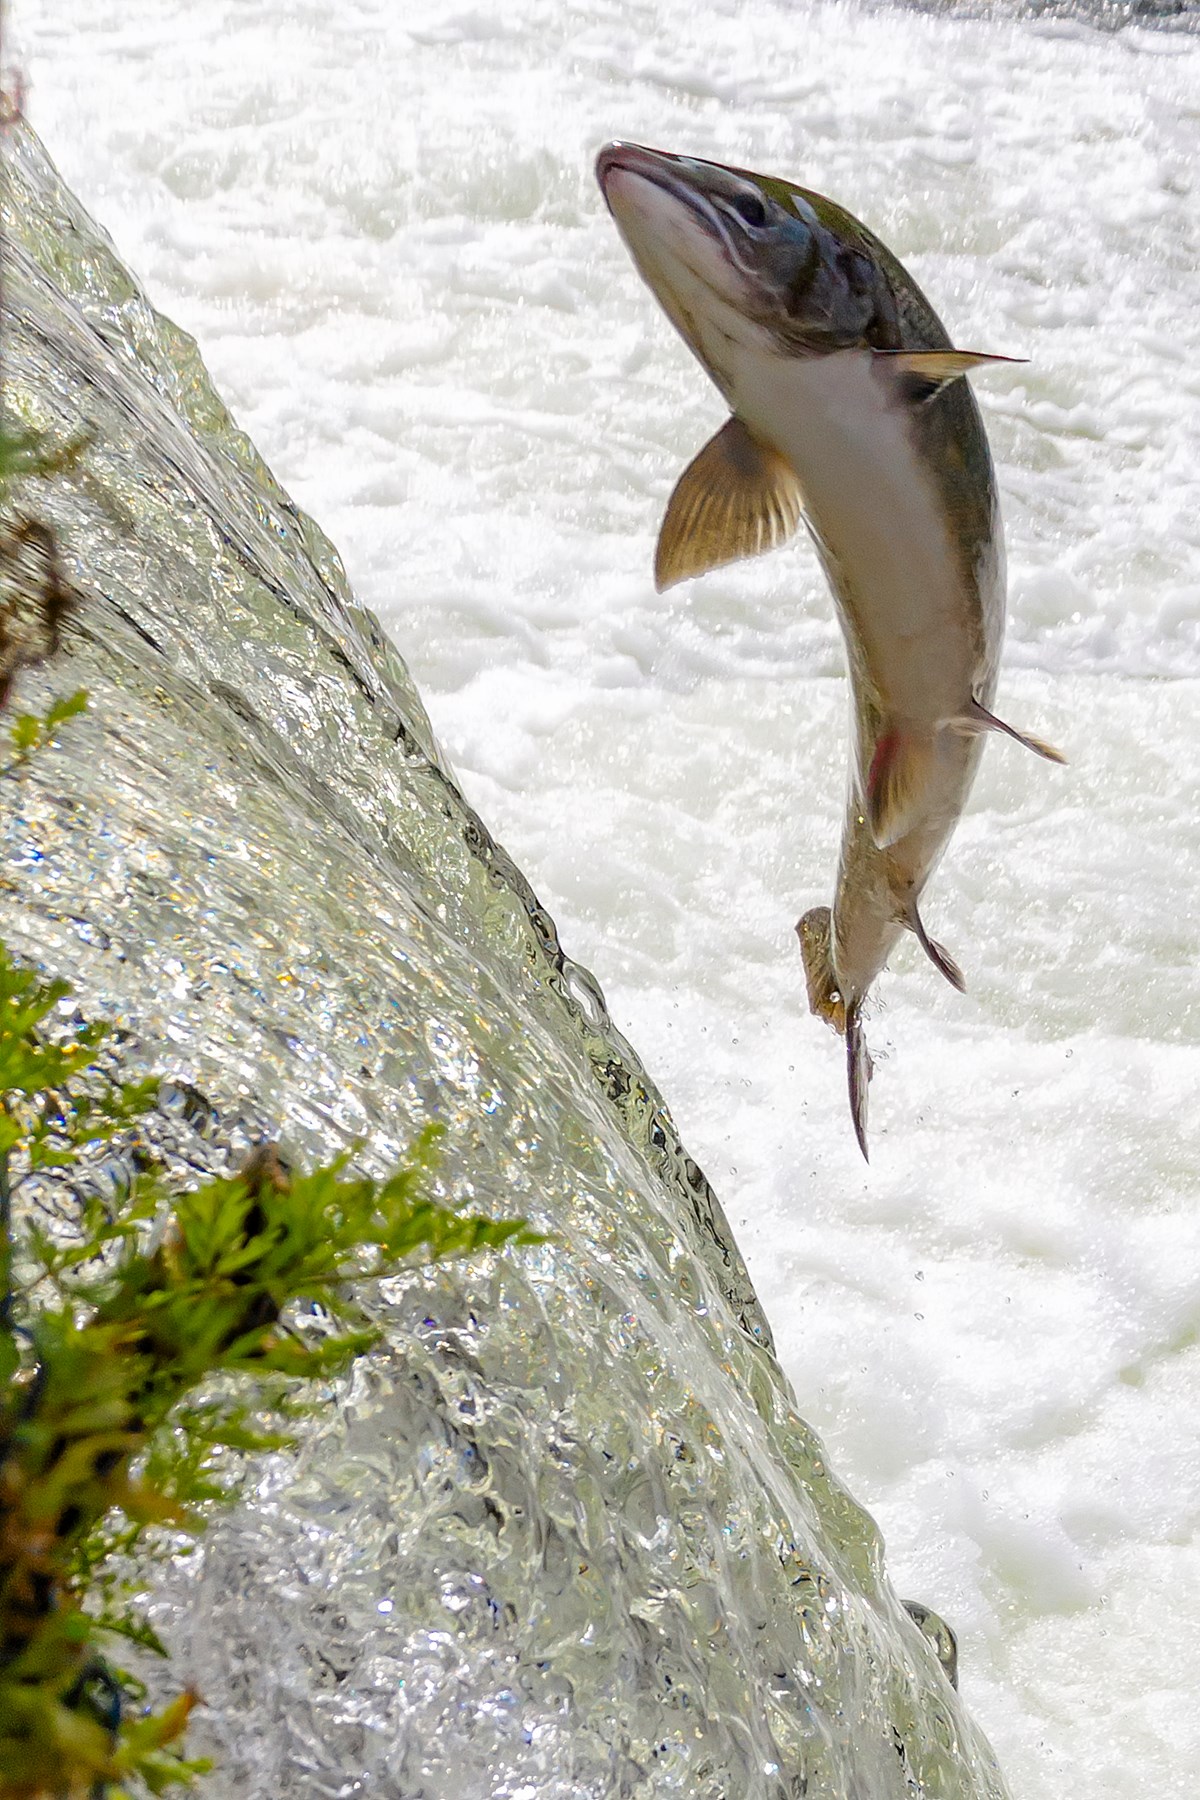 Male Atlantic salmon trying to overcome a disused weir during its upstream migration. 
Photo Credit: Manuel Mendez Blanco